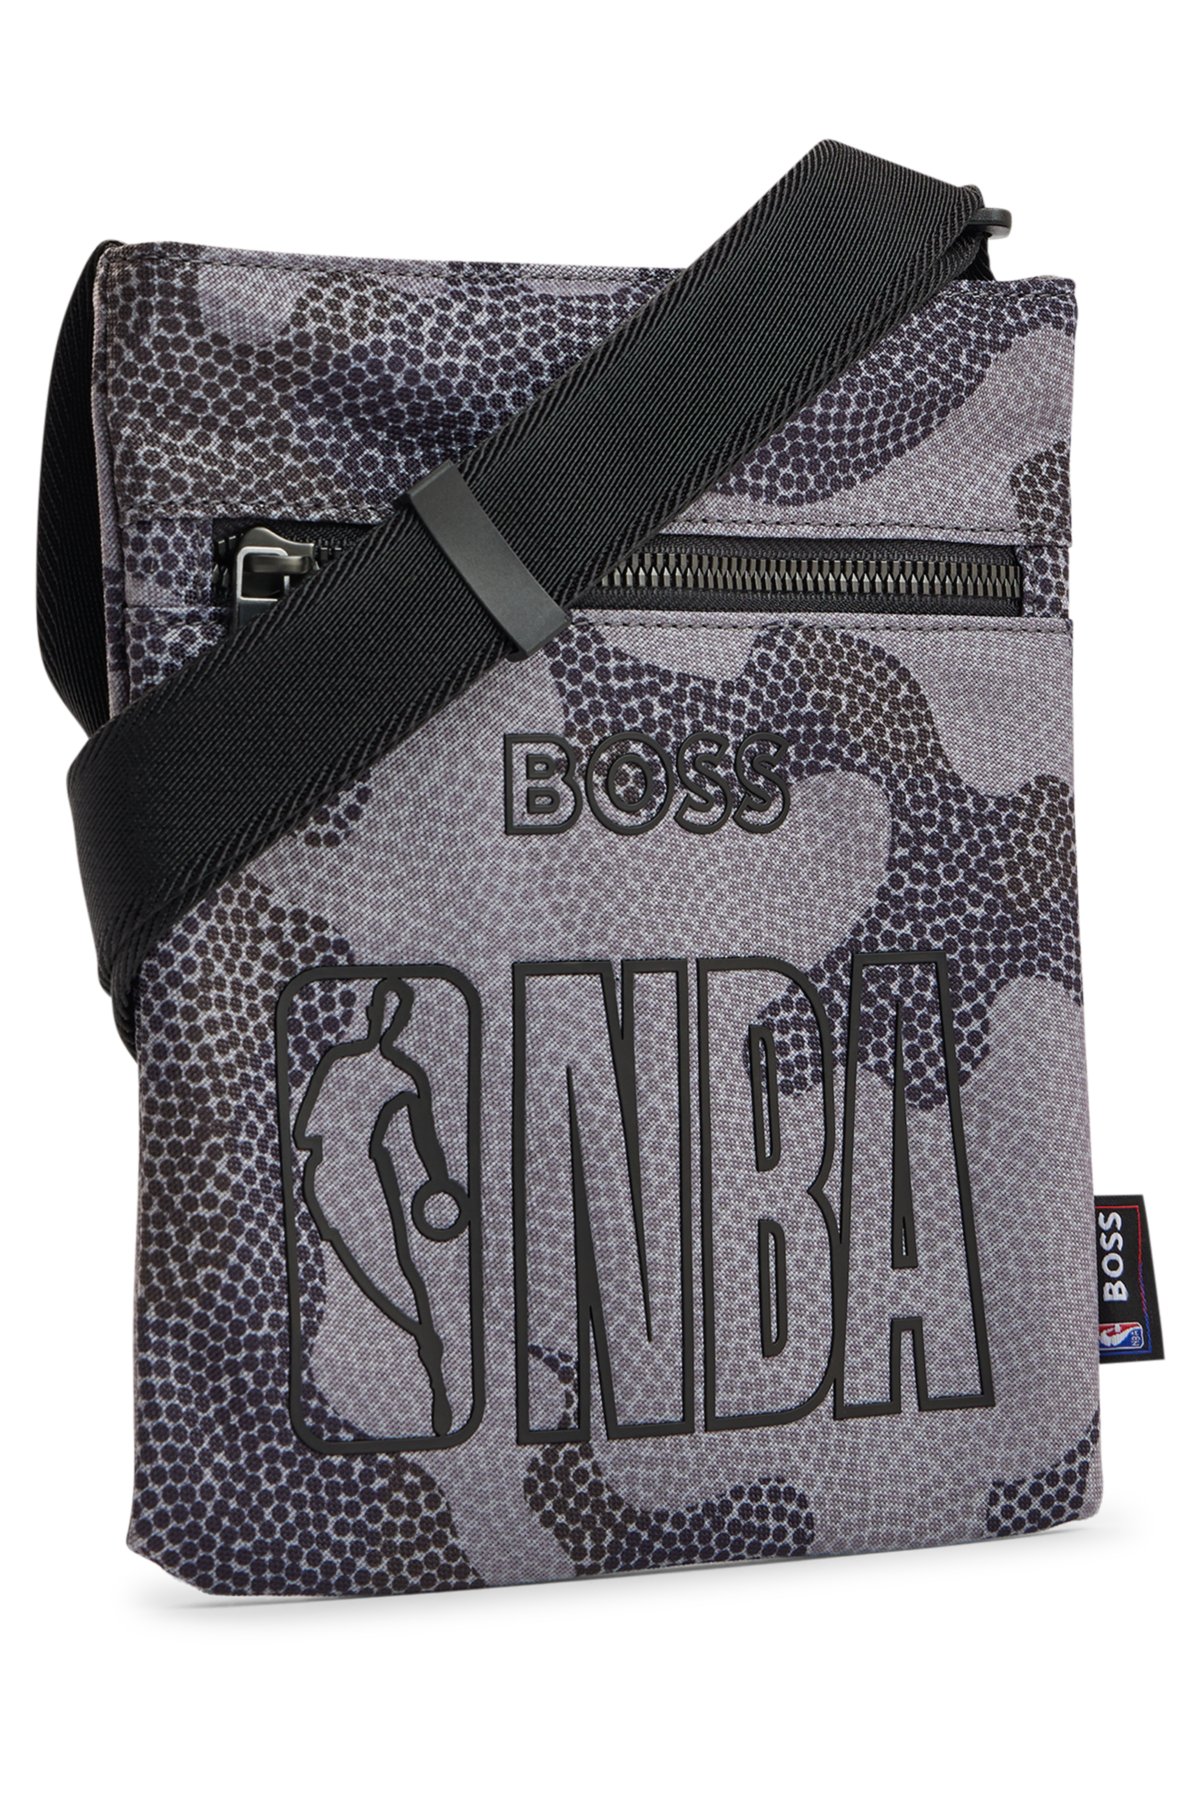 BOSS by HUGO BOSS & Nba Envelope Bag In Recycled Fabric With Collaborative  Branding in Black for Men